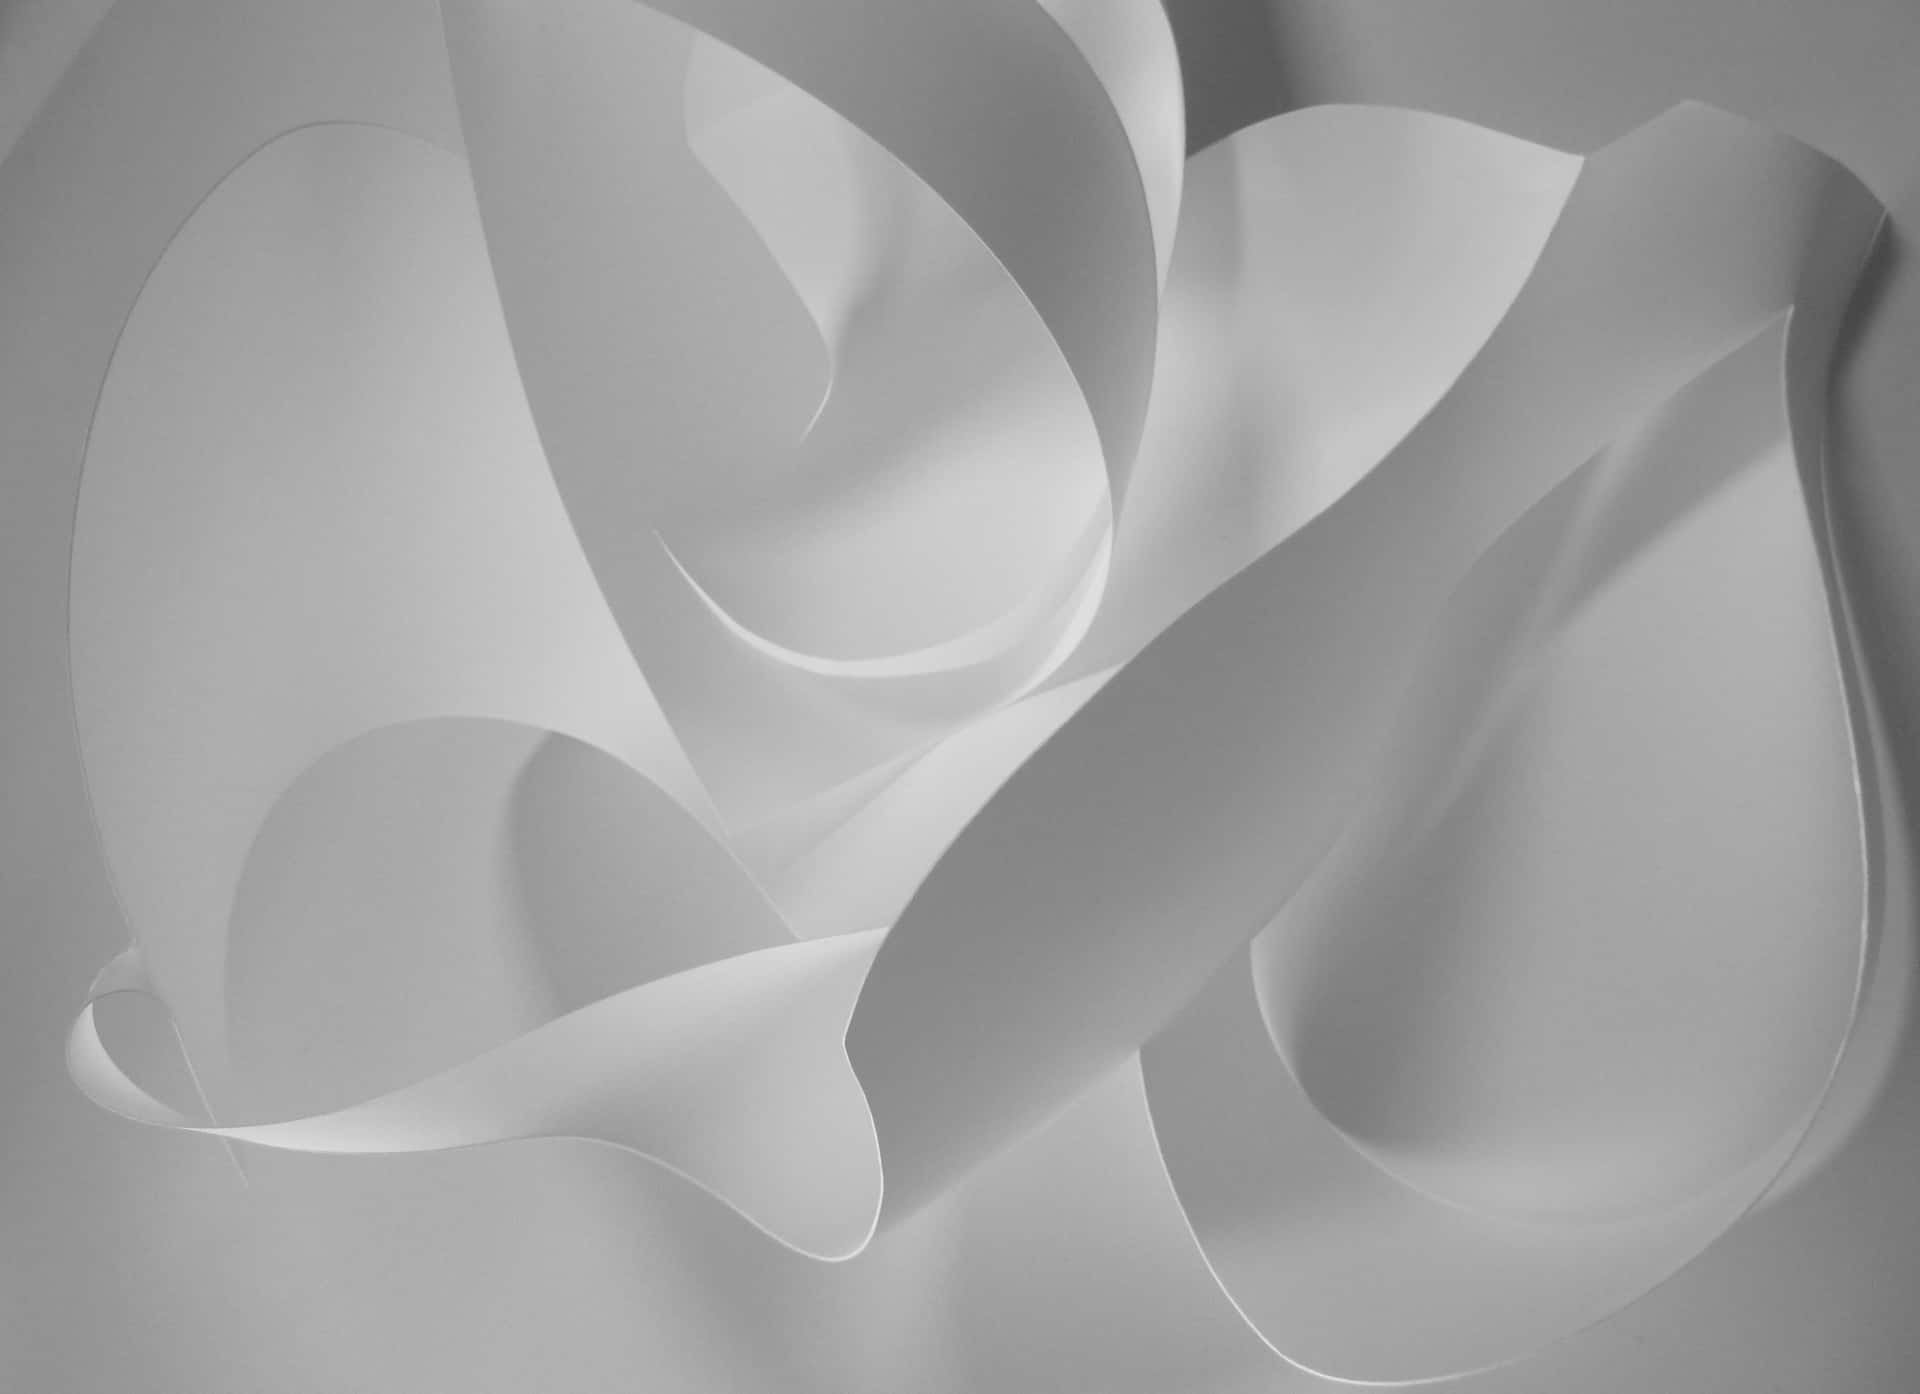 A White Paper Sculpture With A White Background